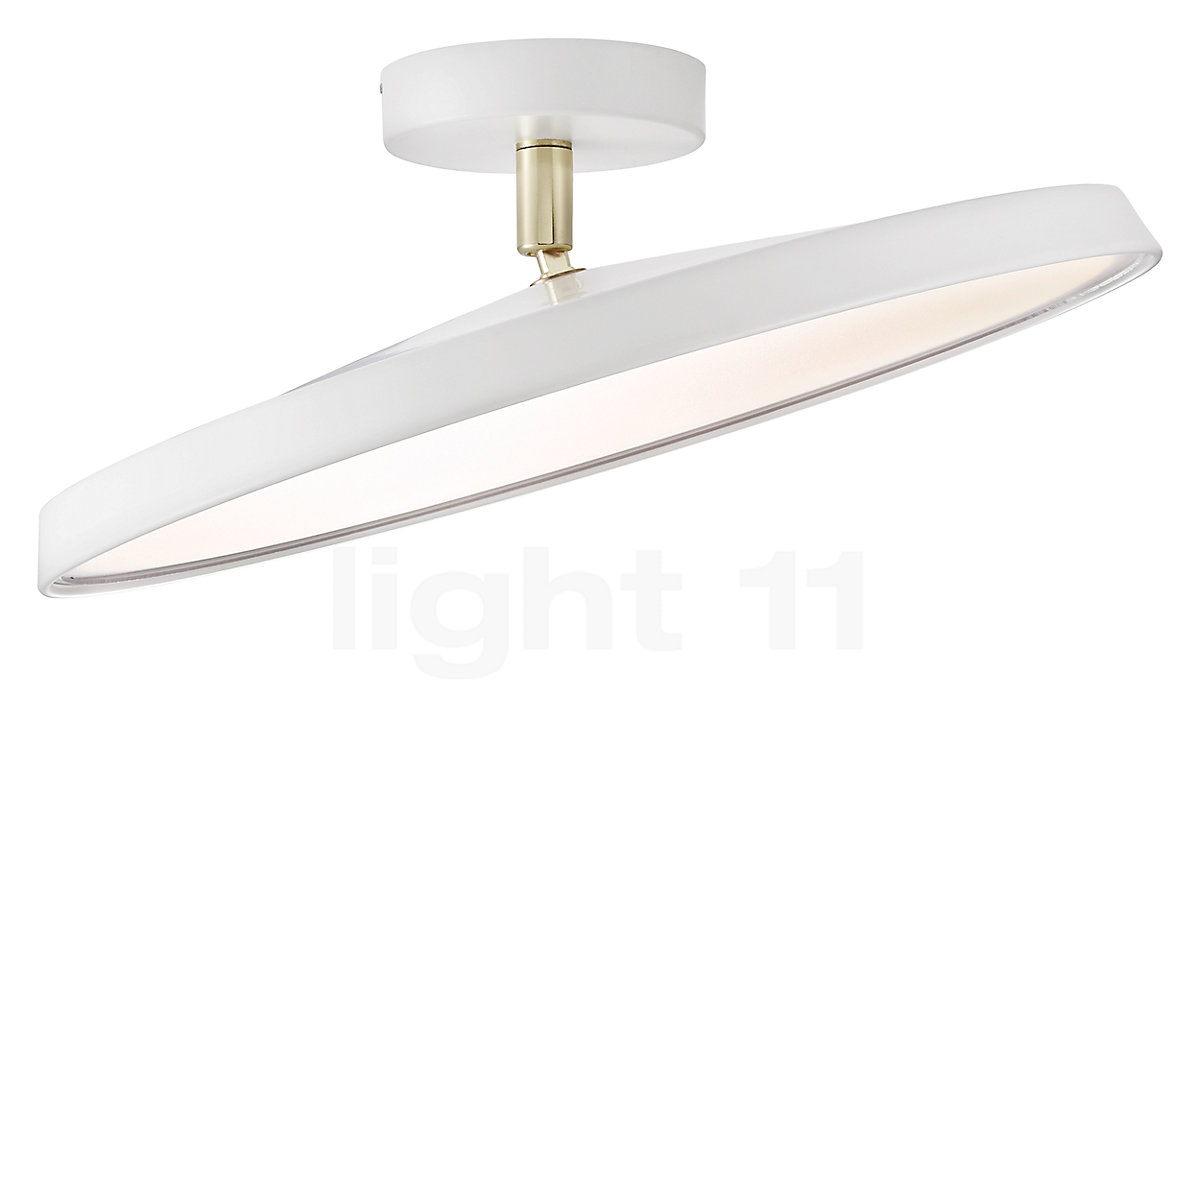 Buy Design for the People at Pro Light LED Ceiling Kaito